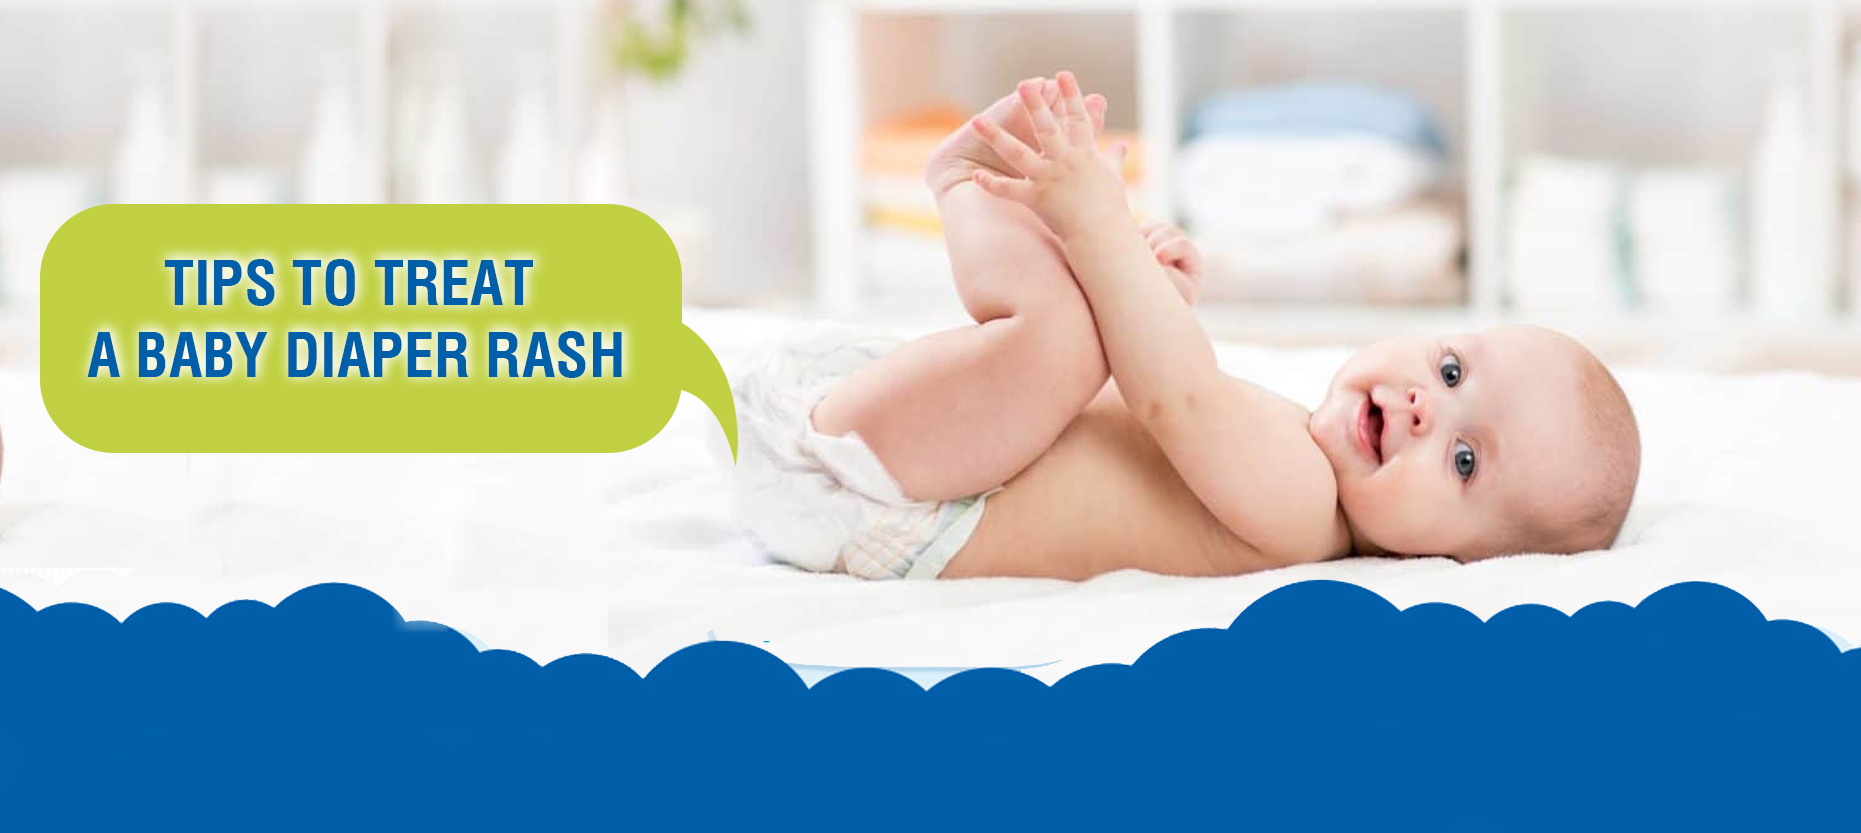 3 Tips to Diaper Rash That You Need to Know